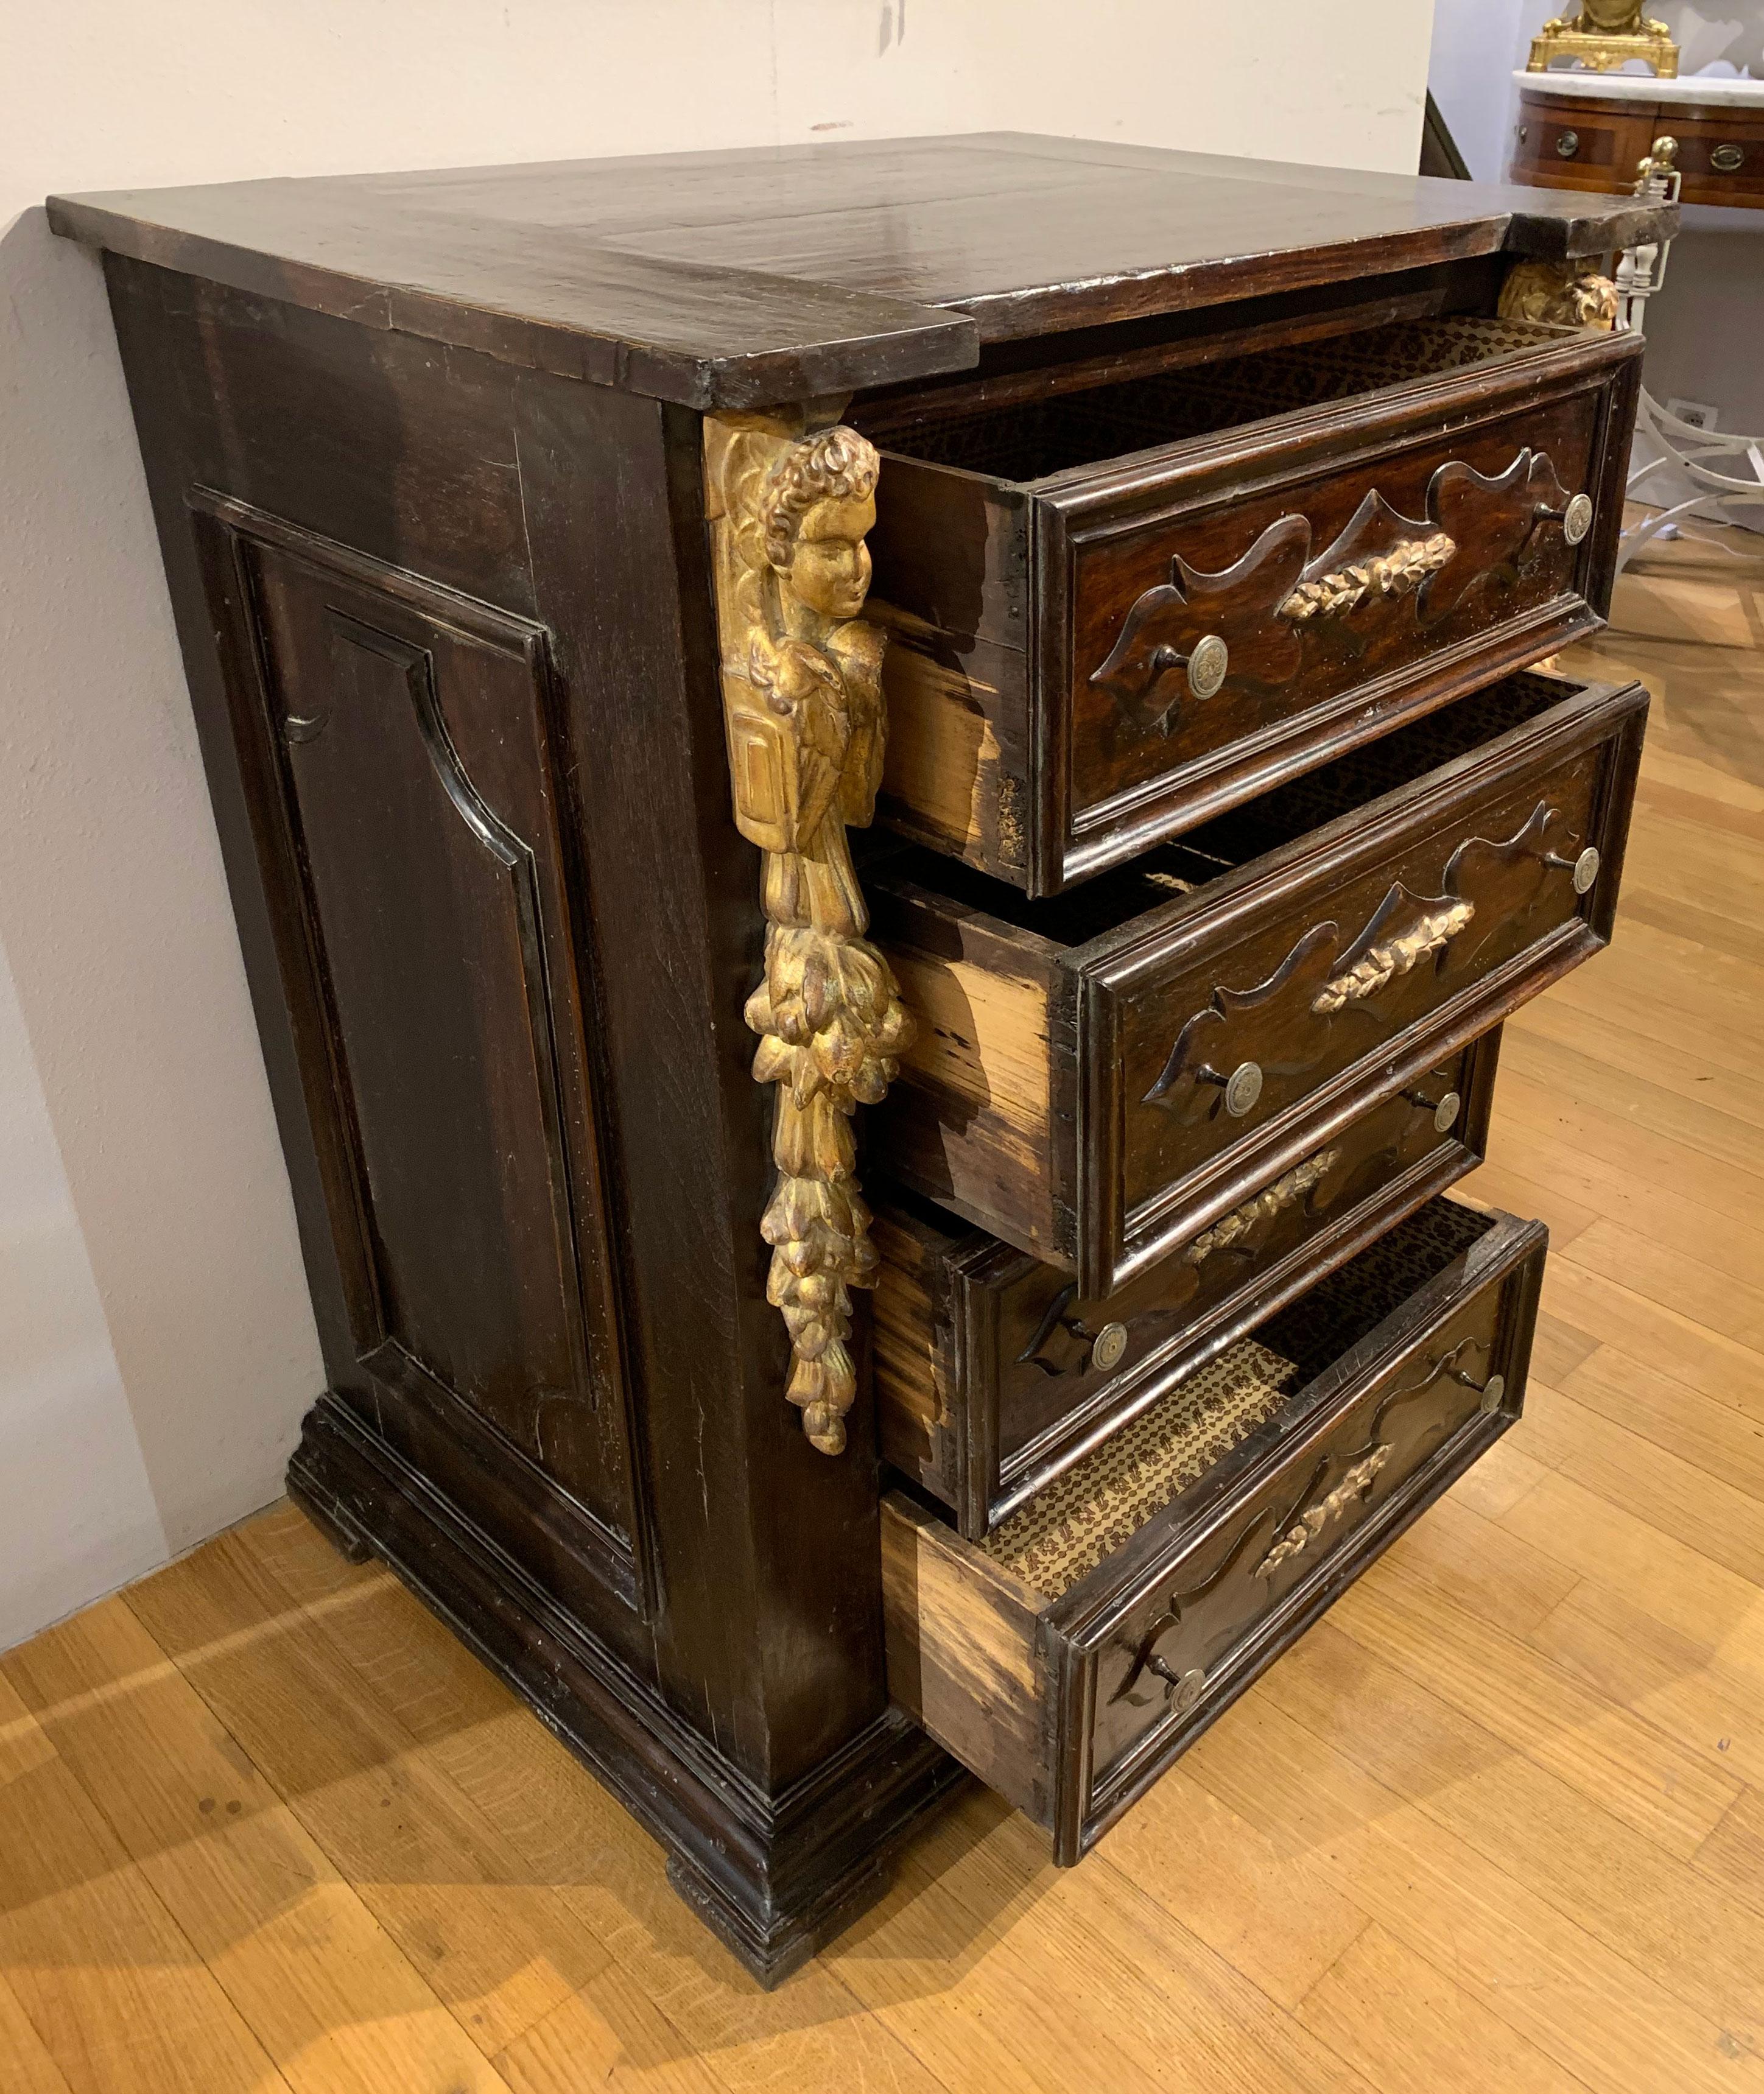 Beautiful small chest of drawers with four drawers in carved walnut with tiles both on the drawers and on the sides.
Typical Tuscan cabinet-making from the end of the 16th century, it is embellished with the carved and gilded finishes typical of